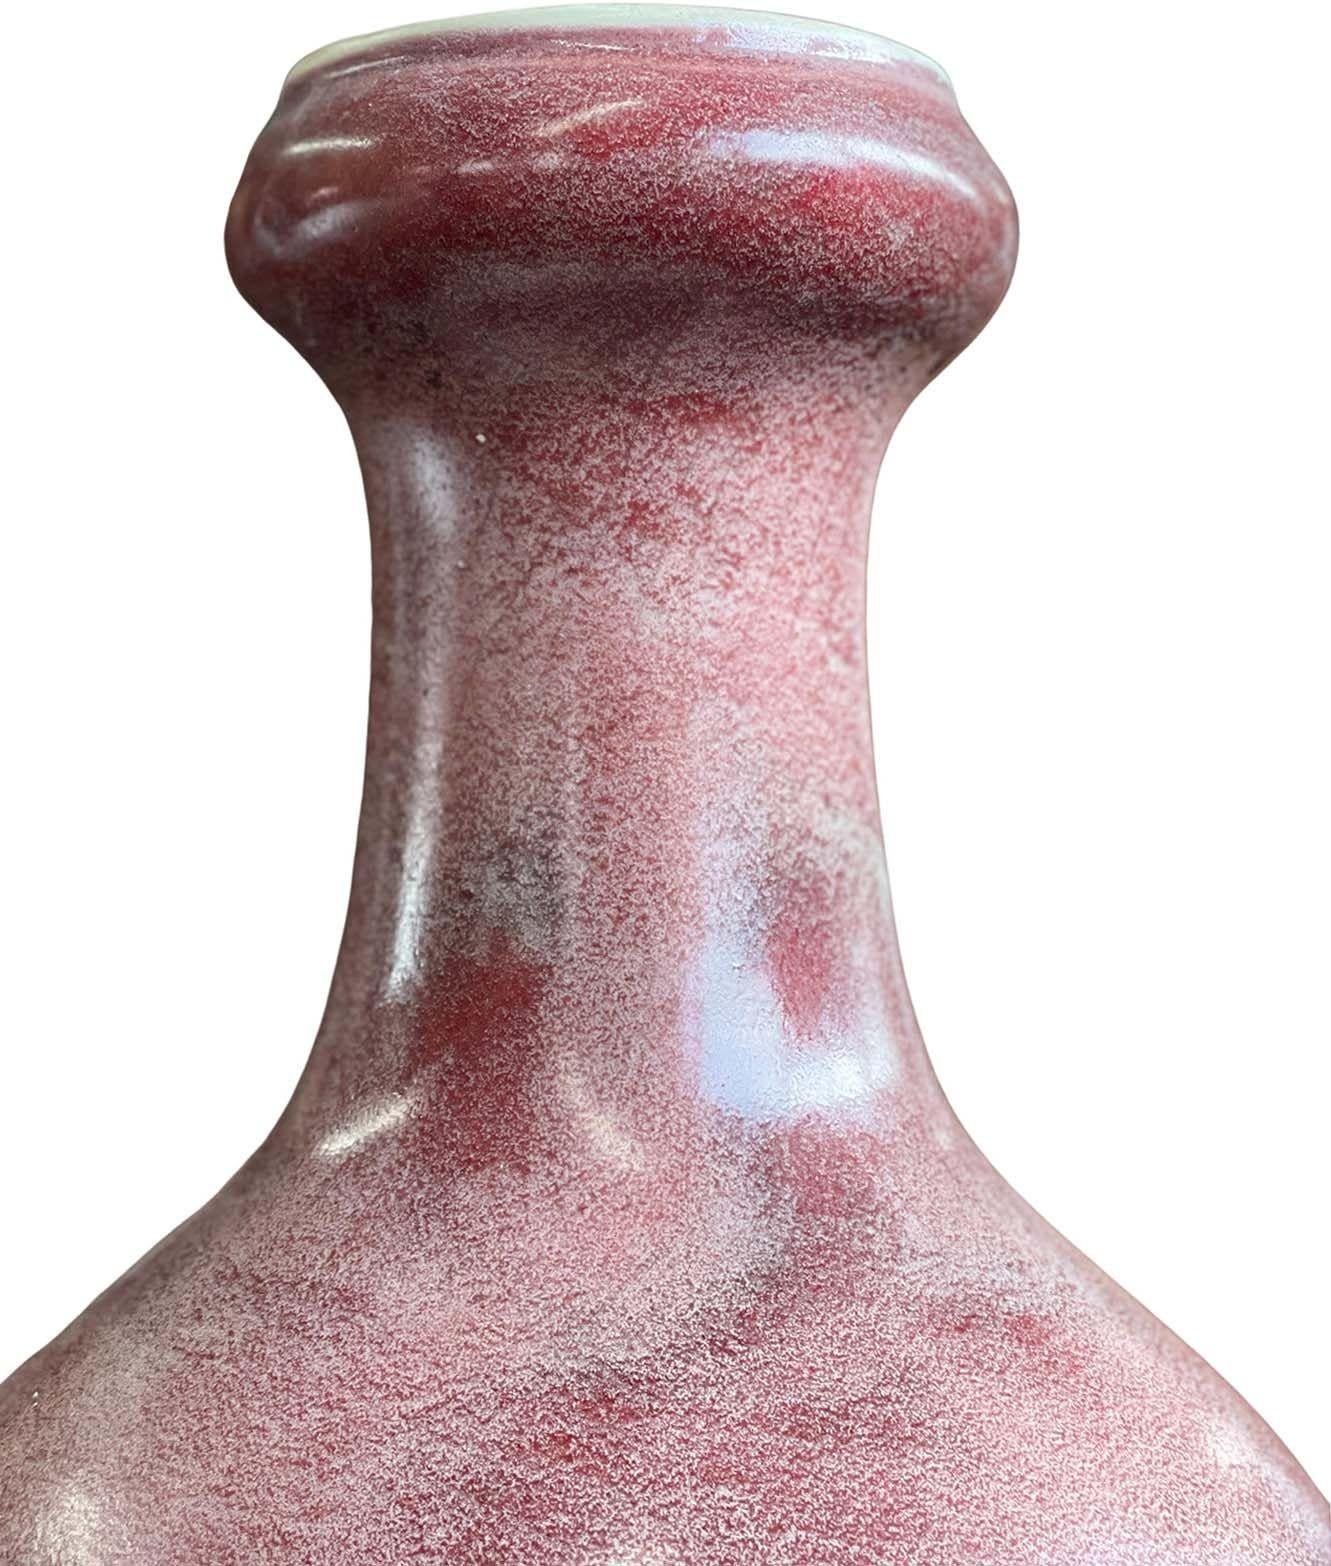 Traditional Chinese porcelain vase in an oxblood red tone (18th century). 
Dimensions:
15